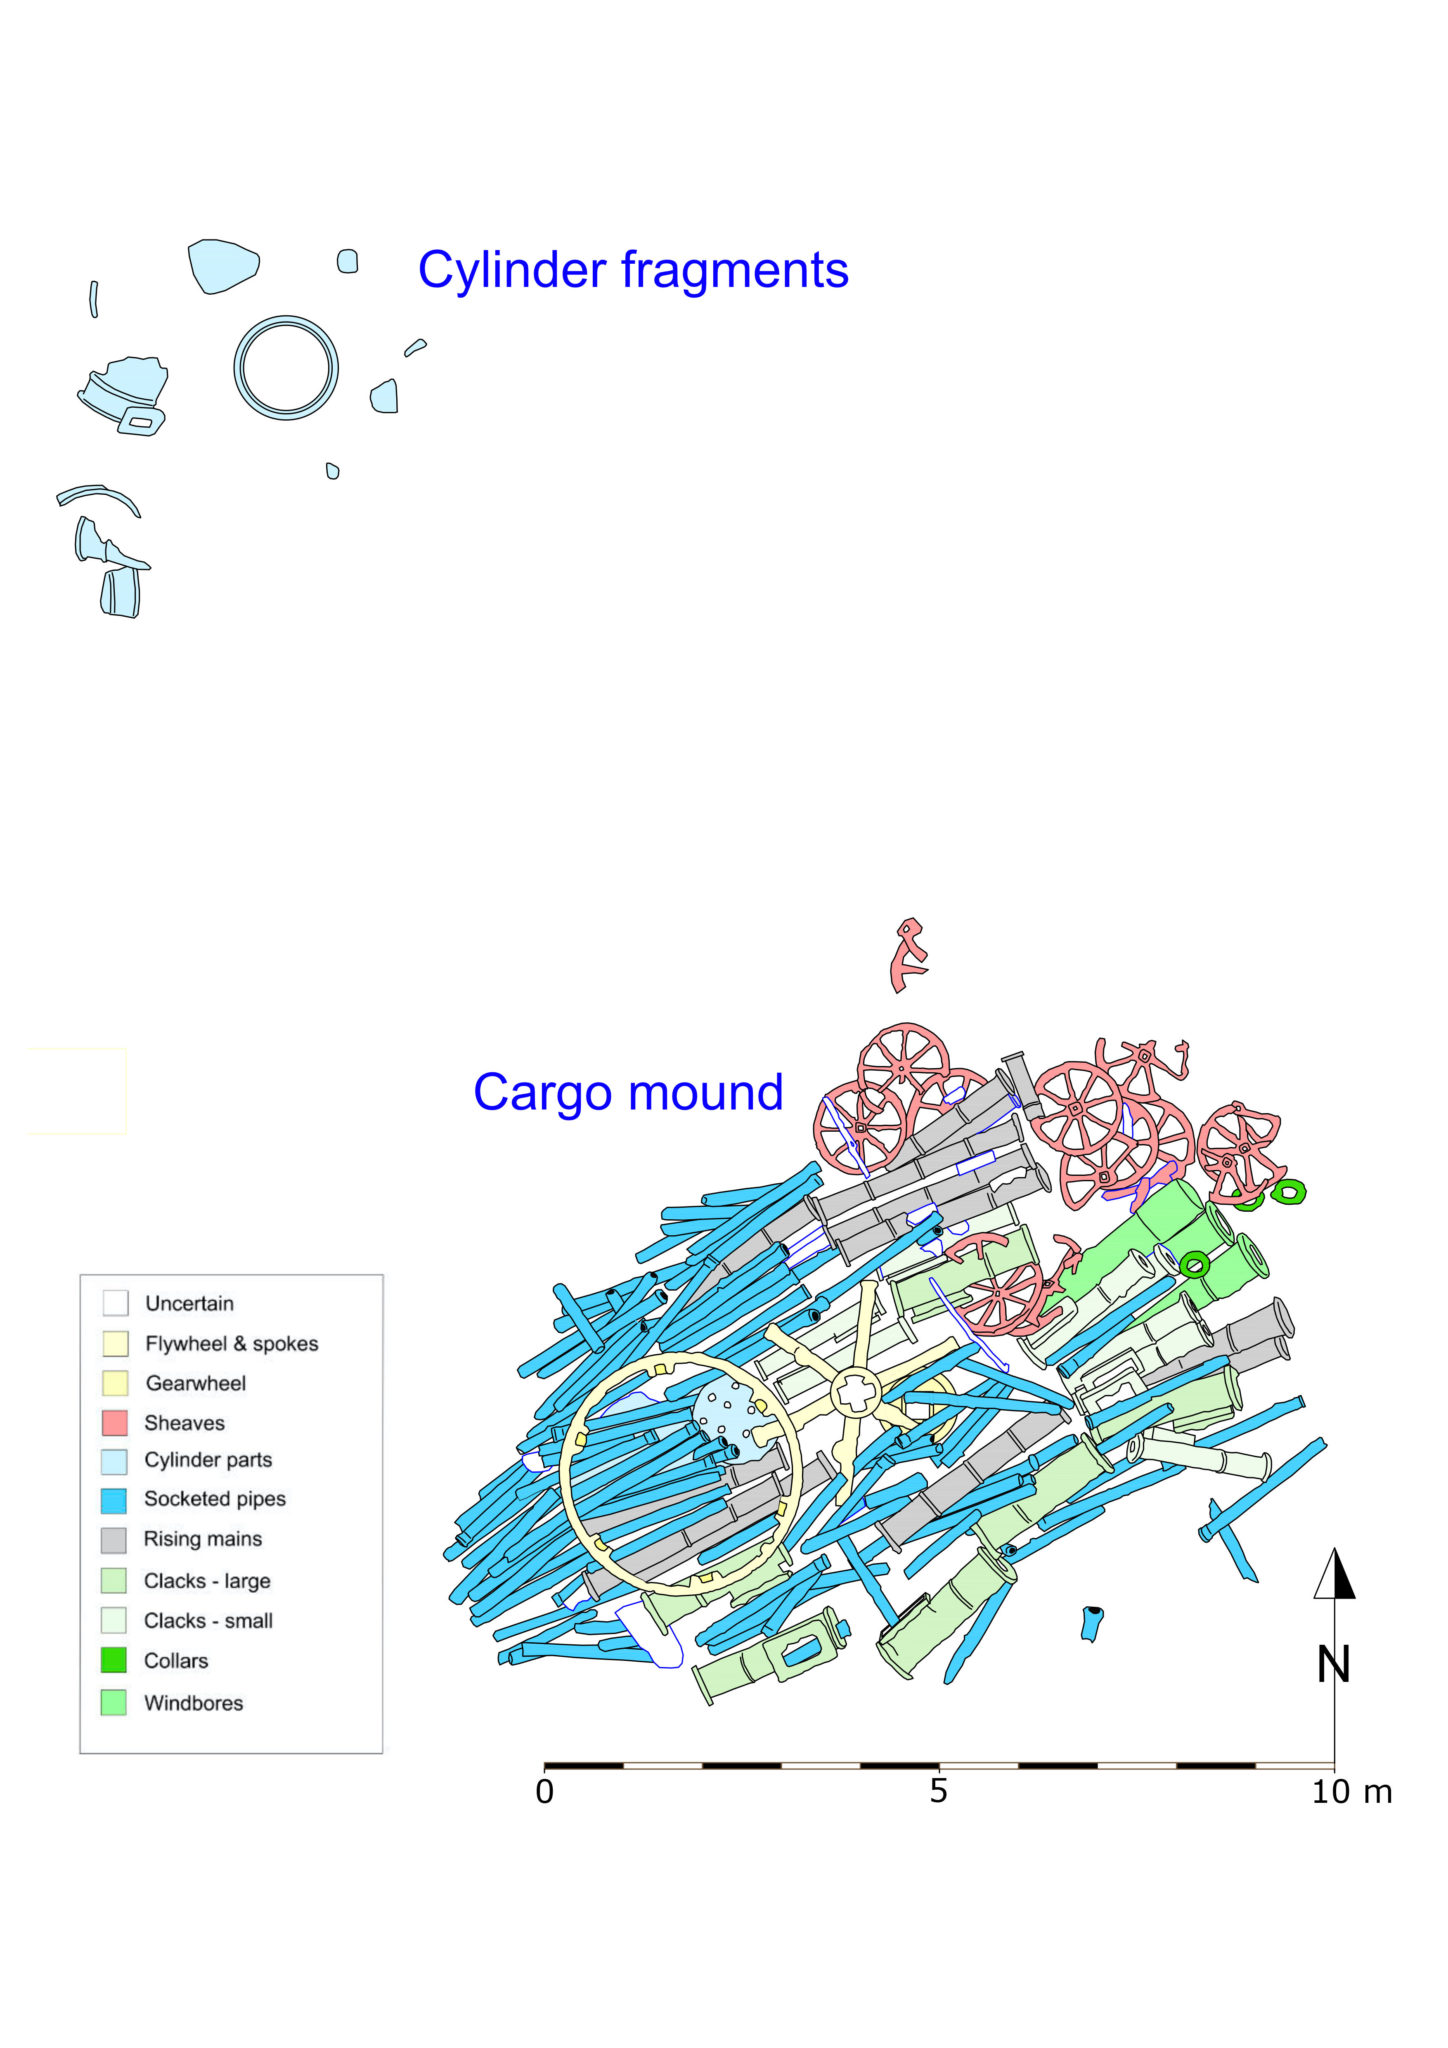 A plan showing the location (about 11 metres north-west) of the cylinder fragments in relation to the cargo mound. Colours indicate the component types on the cargo mound.